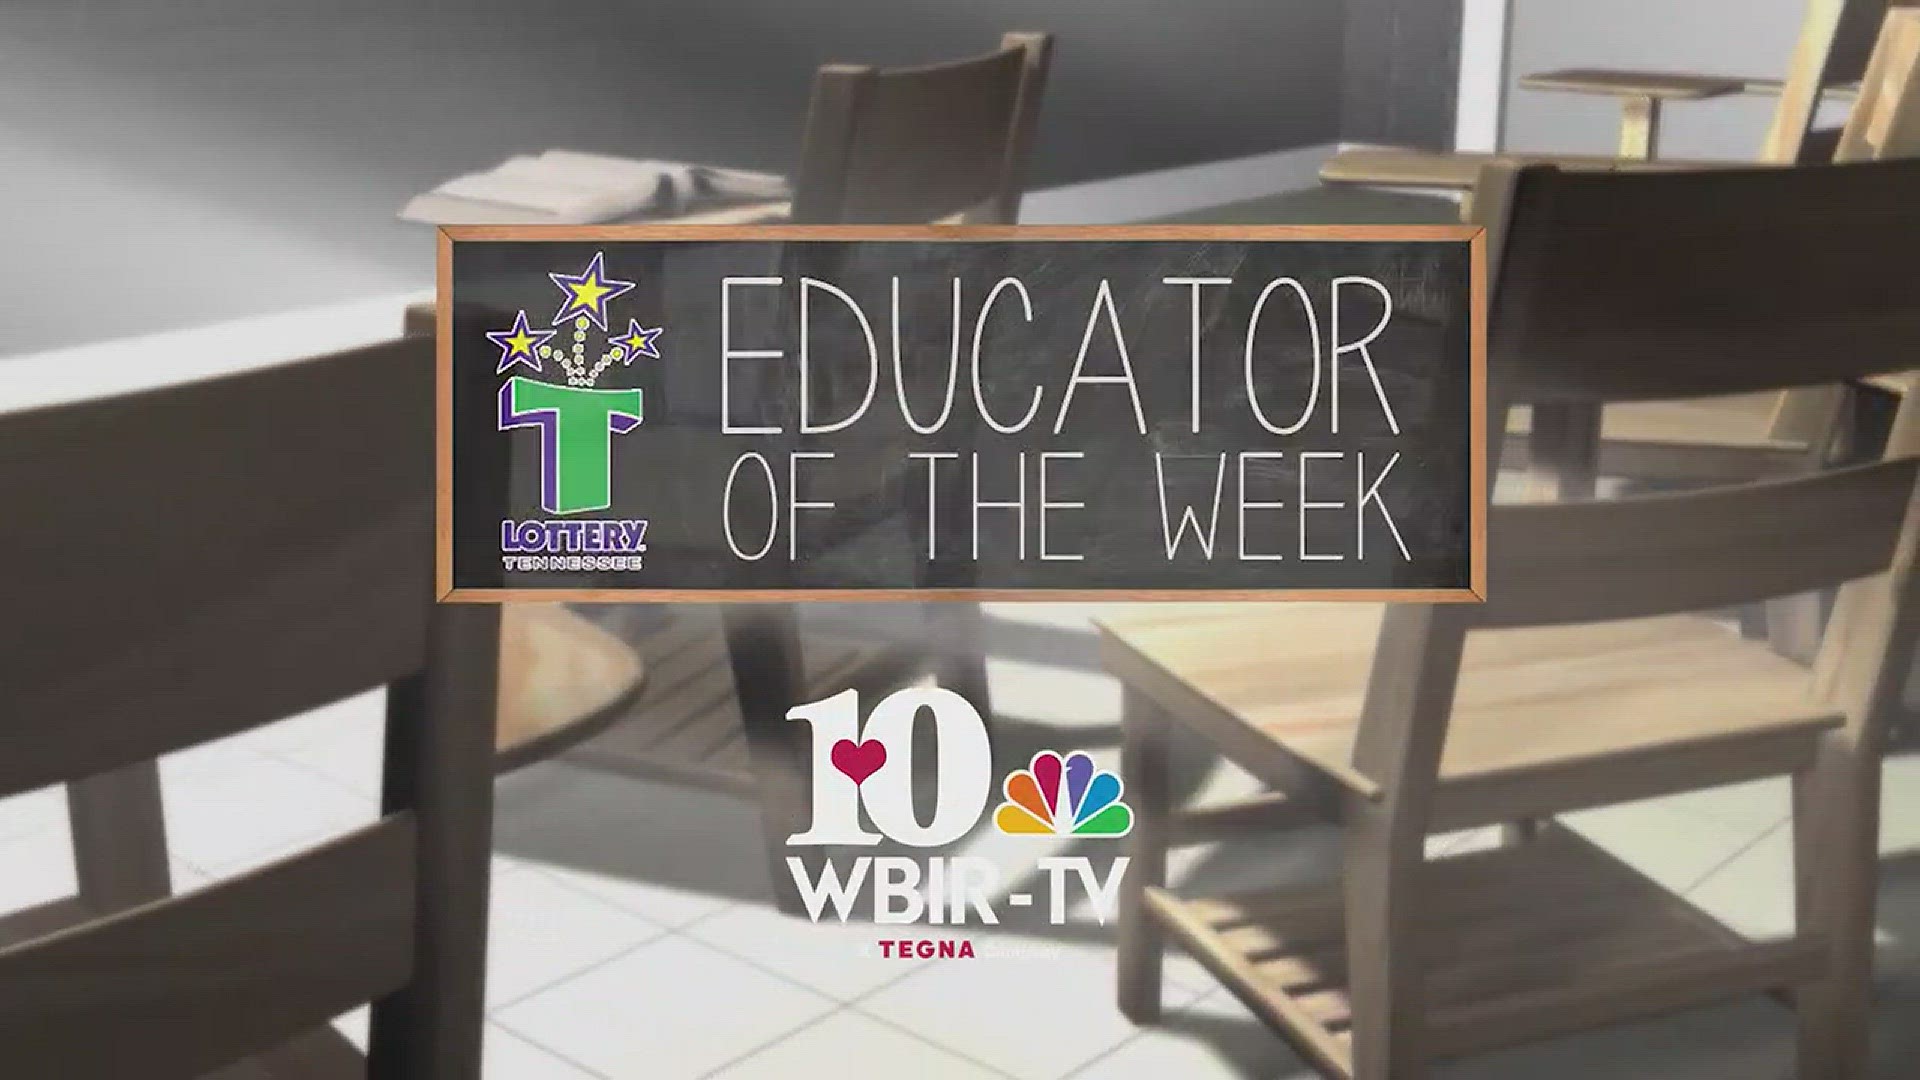 The educator of the week 10/30 is Courtney Minton.